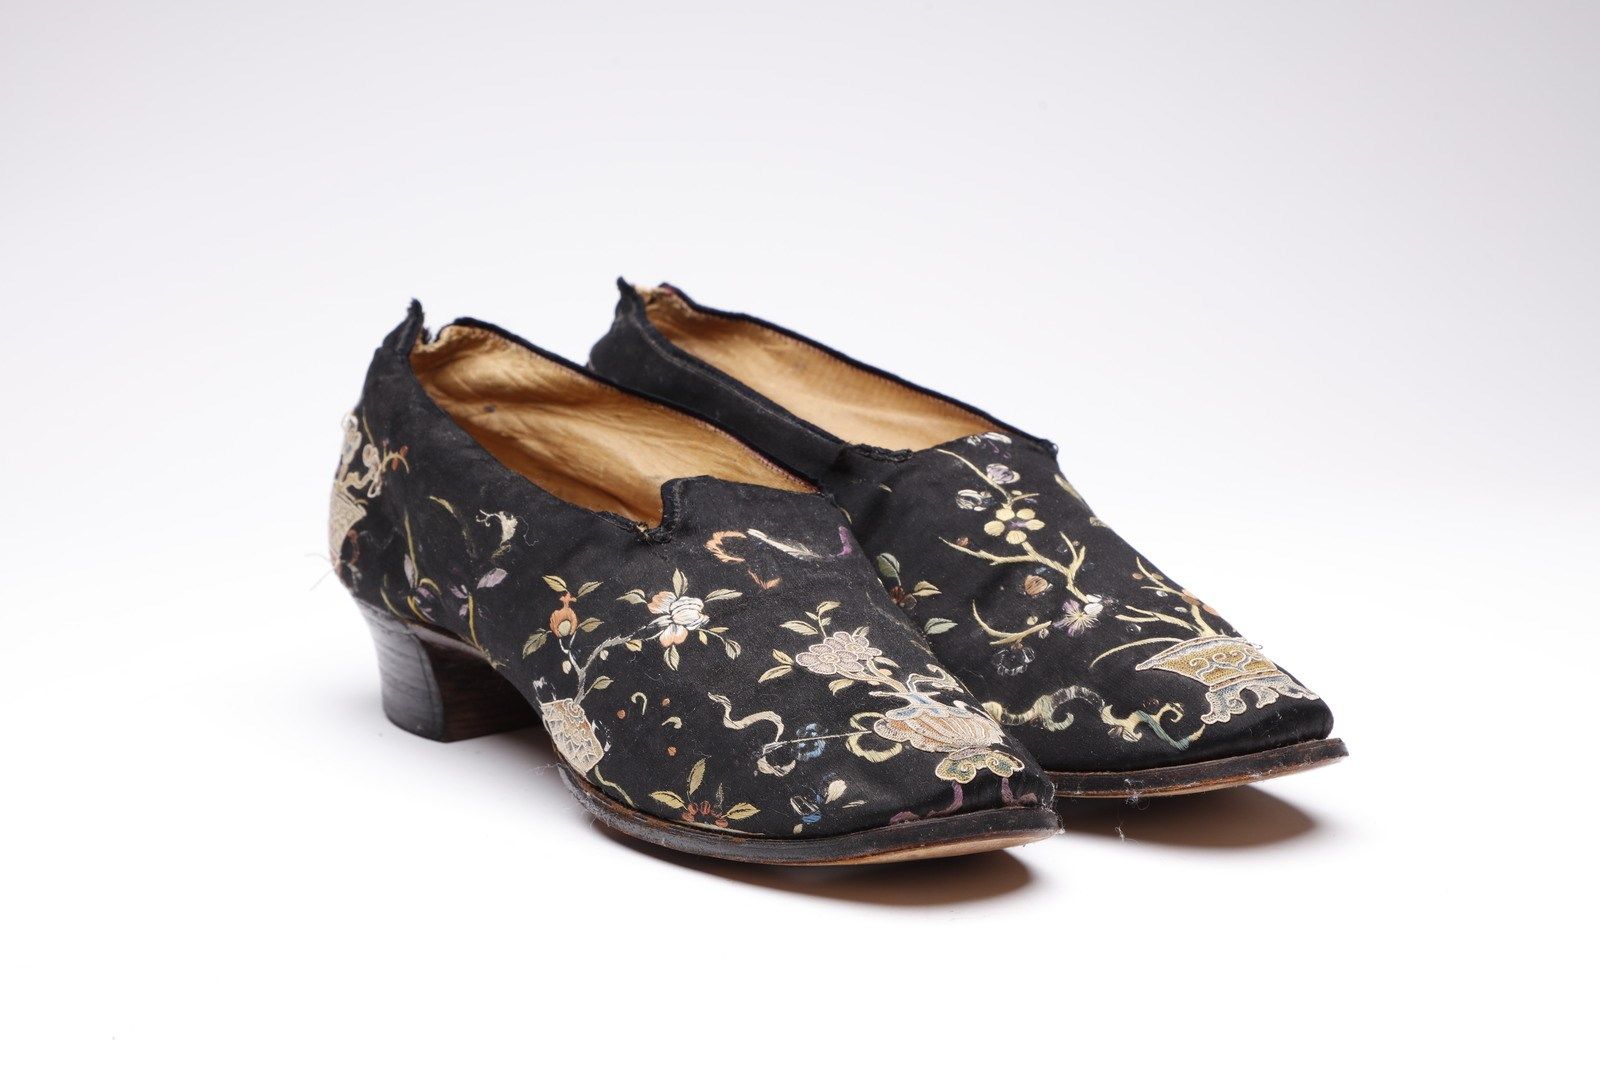 MANIFATTURA DEL XVIII SECOLO Pair of shoes, in fabric with floral and vegetable &hellip;